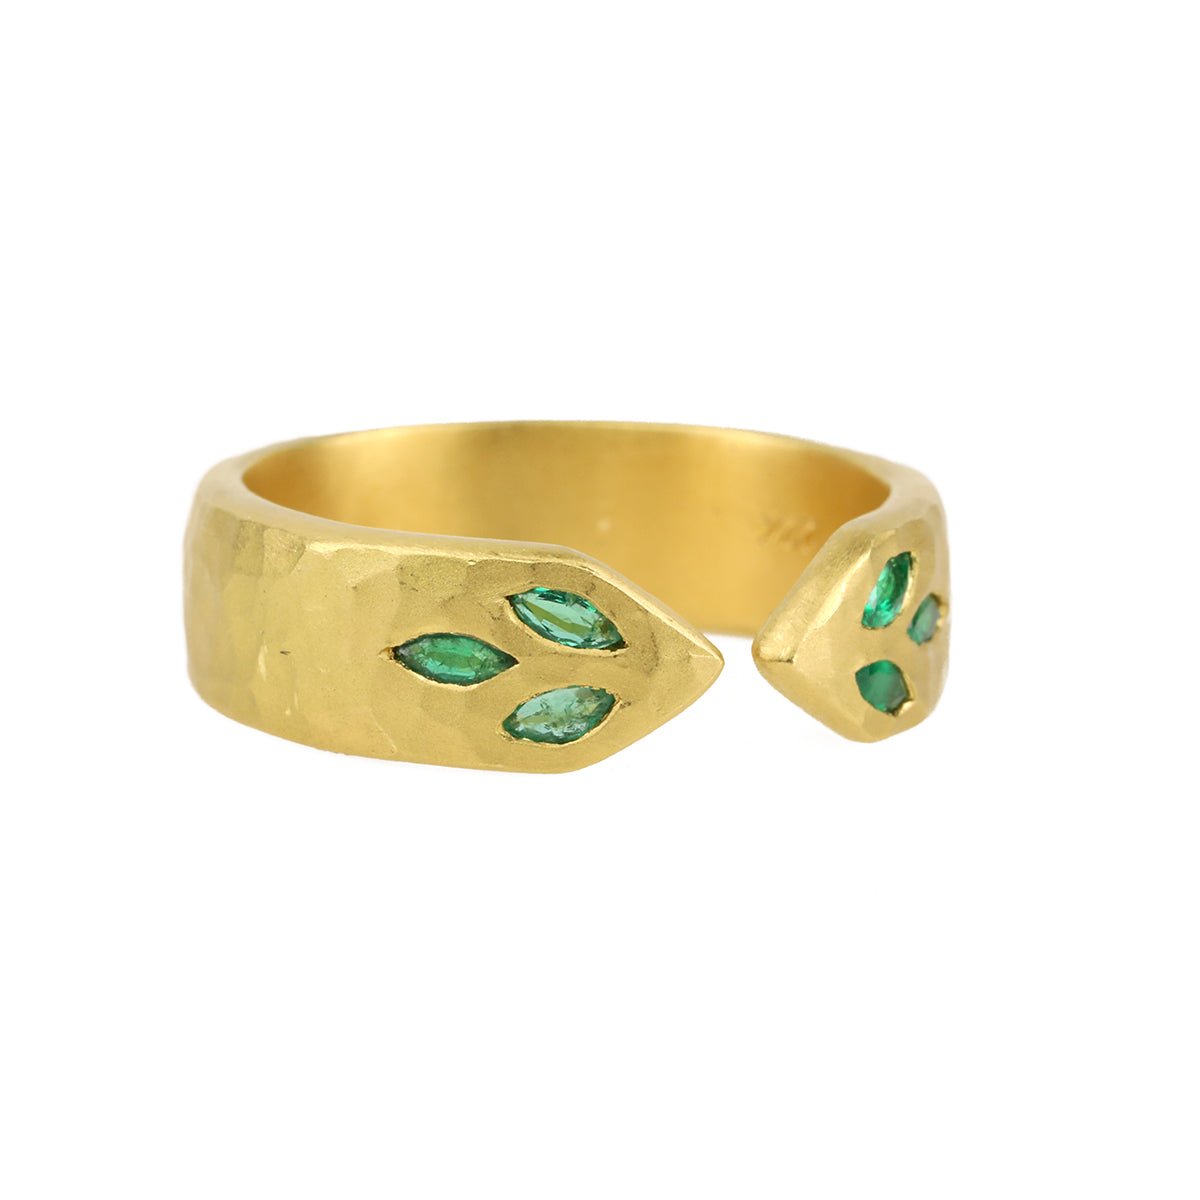 Cathy Waterman 22K Gold Hammered Open Ring with Marquise Emerald "Leaf" Details